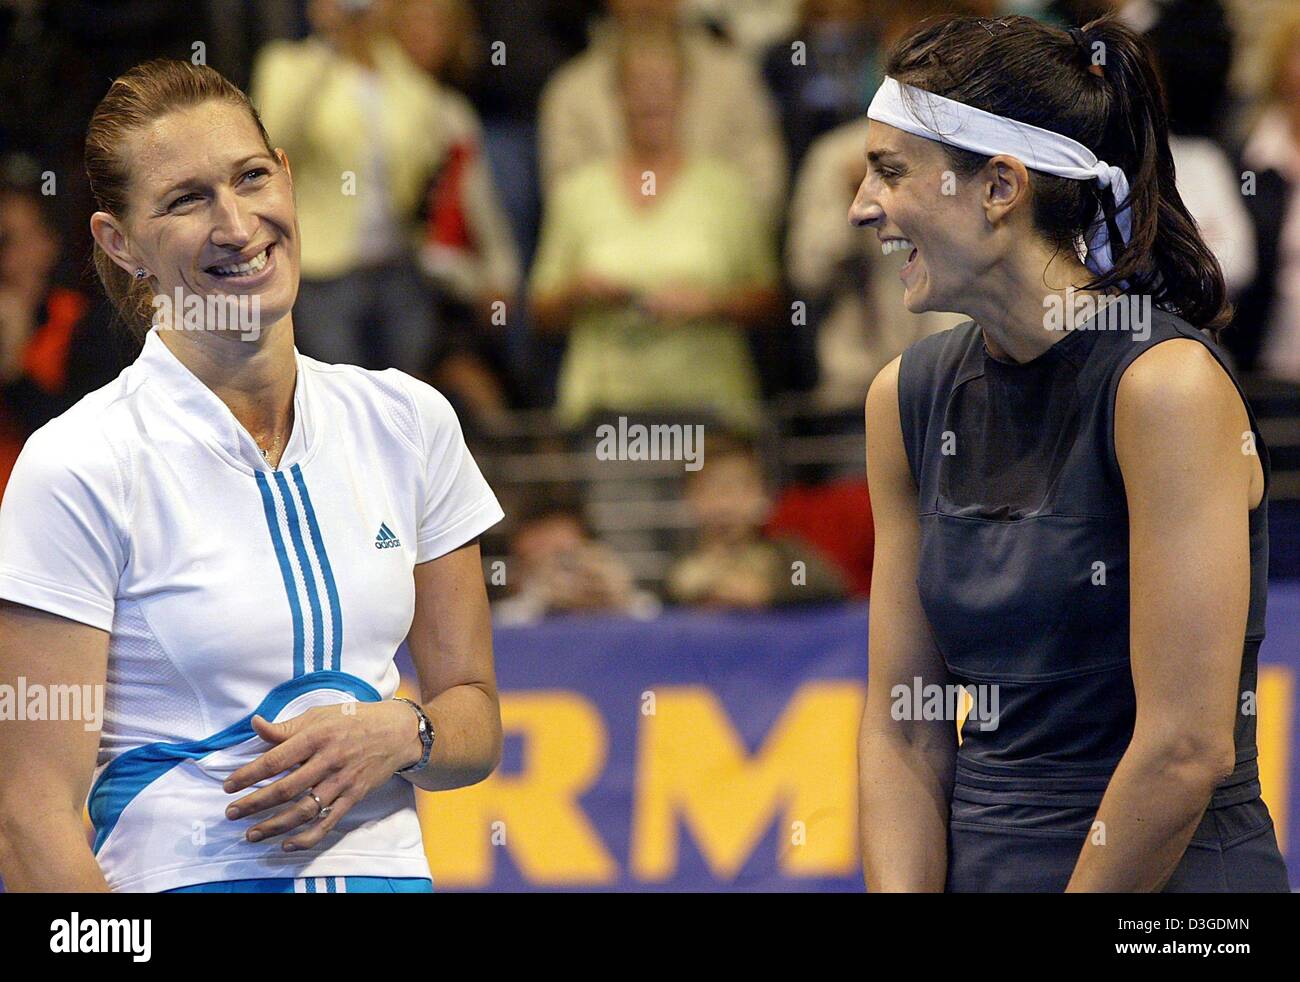 dpa) - Former tennis players Steffi Graf (L) and Gabriela Sabatini share a  laugh after their exhibition match at Max Schmeling Halle in Berlin, 25  September 2004. Steffi Graf, who resigned from